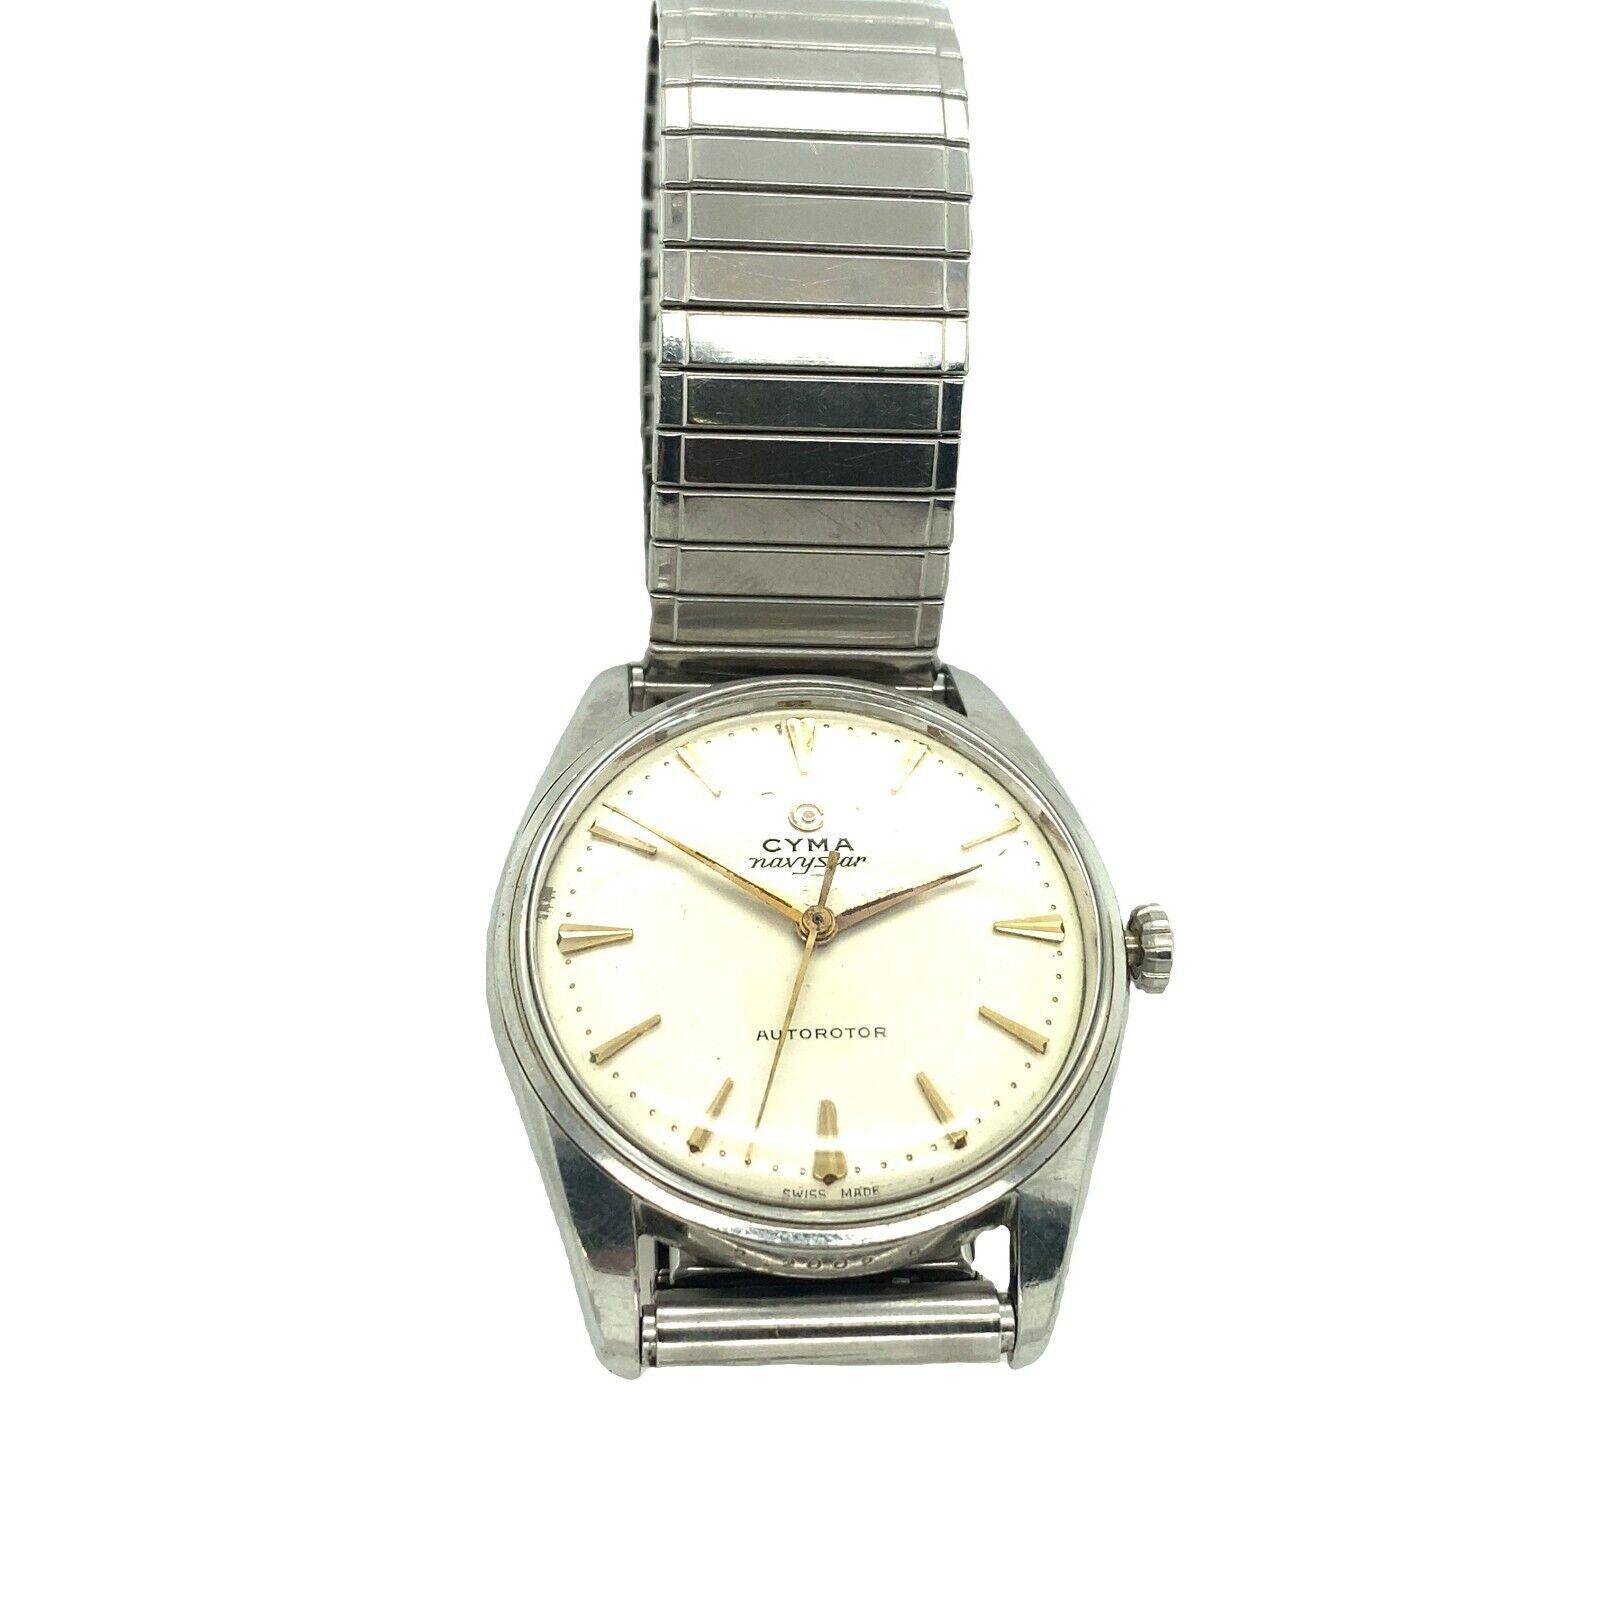 This watch is a vintage Cyma, it's in fantastic condition and works perfectly. It has a polished stainless steel case and a stainless steel bracelet.

Additional Information:
Case Size: 70mm
Case Thickness: 14mm
Reference Number: 219291
Strap Width: